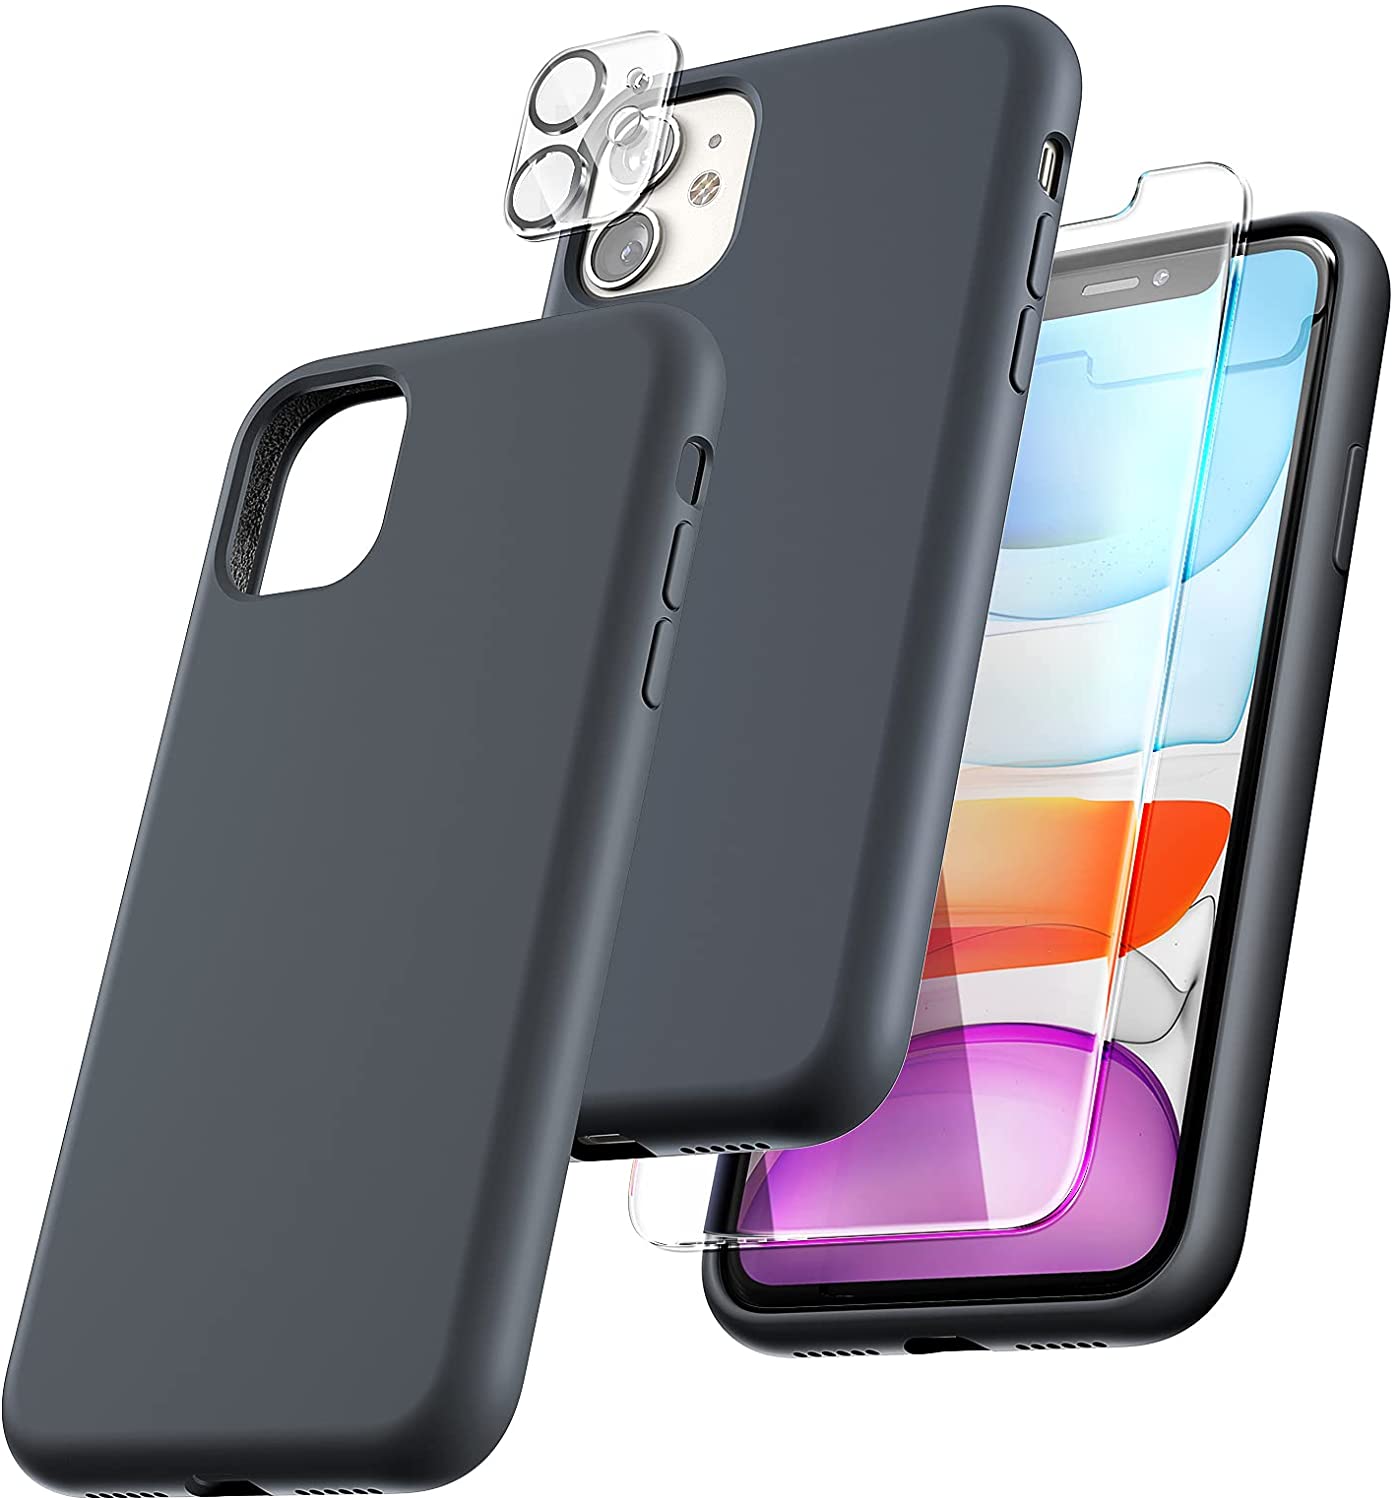 TOCOL [5 in 1] Designed for iPhone 11 Case, with 2 Pack Screen Protector + 2 Pack Camera Lens Protector, Liquid Silicone Slim Shockproof Cover [Anti-Scratch] [Drop Protection], Space Gray